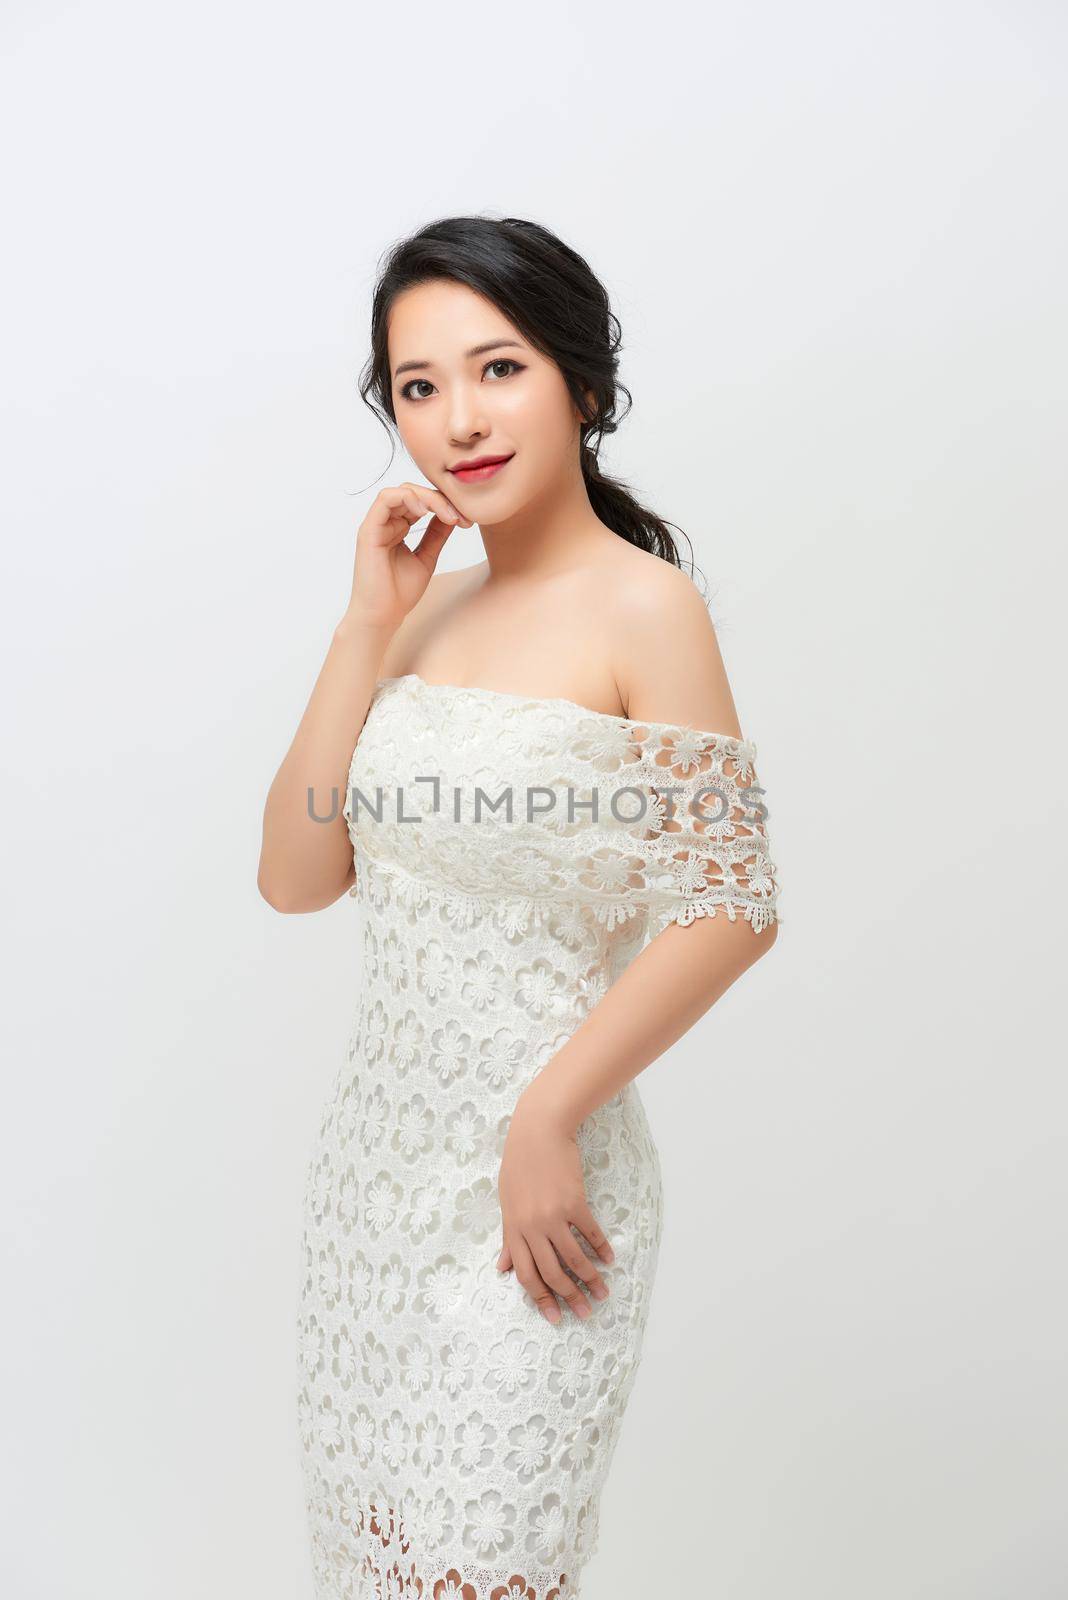 A beautiful girl with great figure in the white lace wedding dress